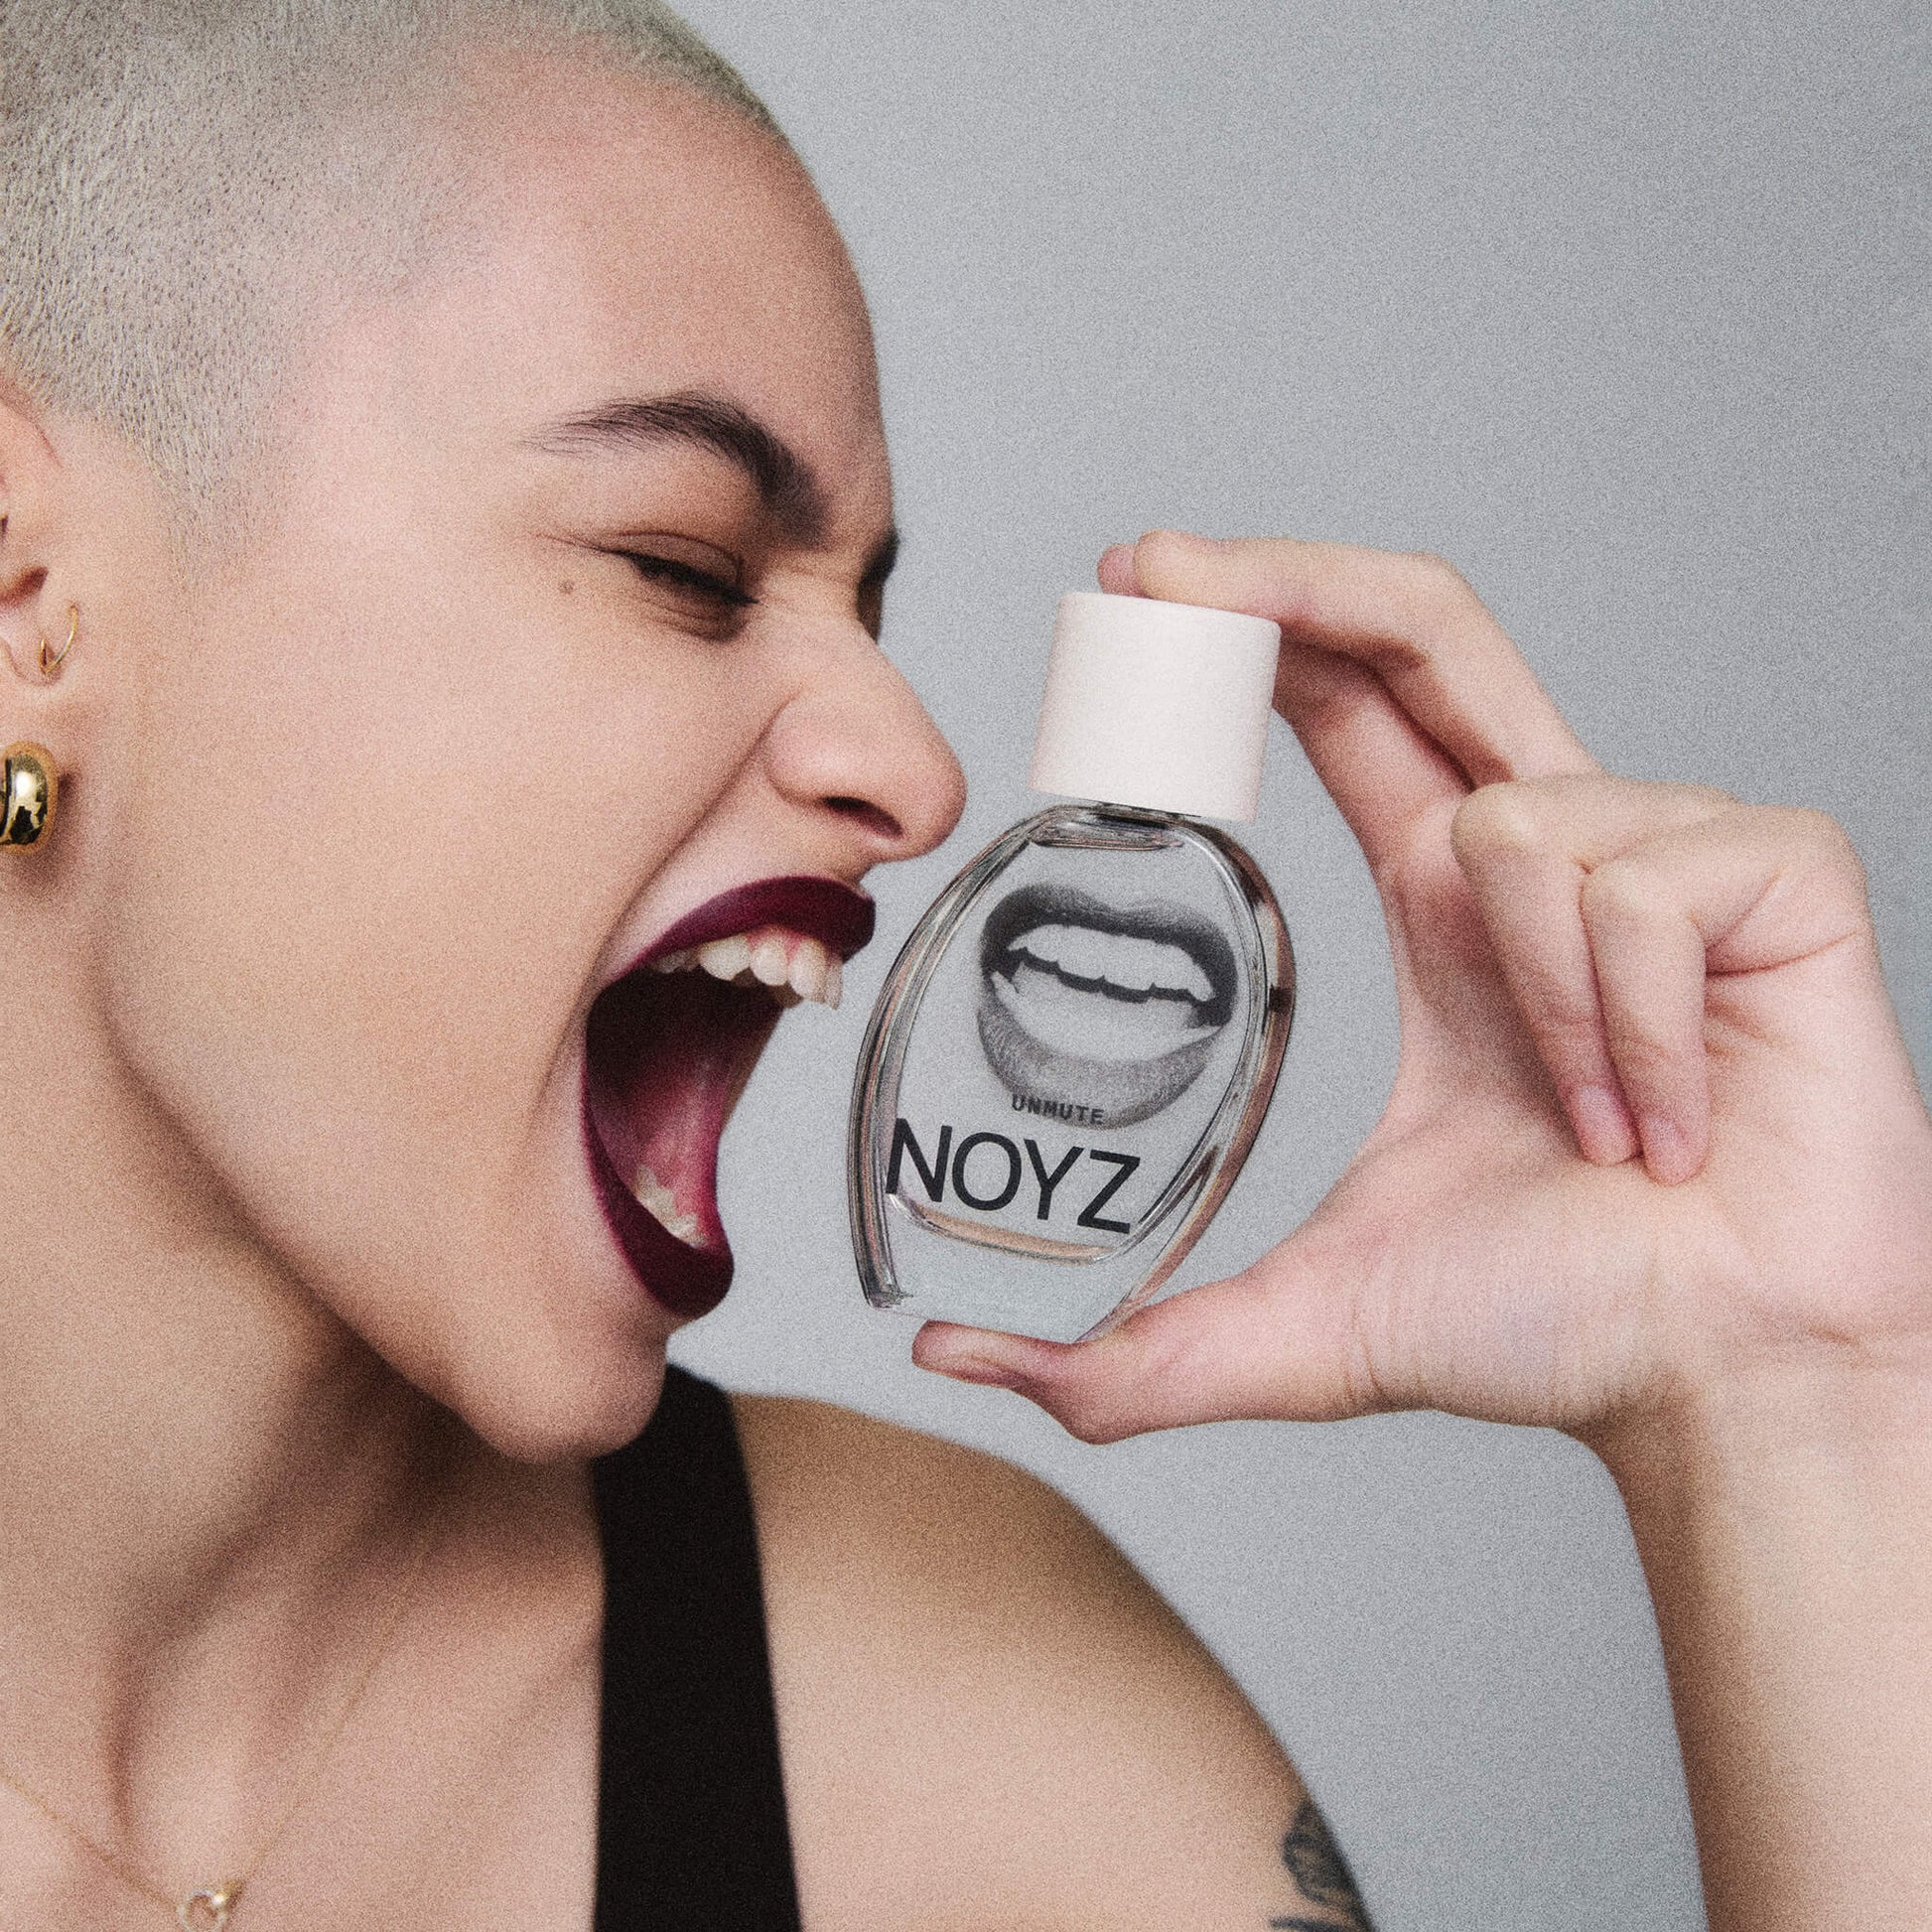 A model holds a bottle of NOYZ perfume Unmute. Explore citrus notes in this vanilla and amber scent